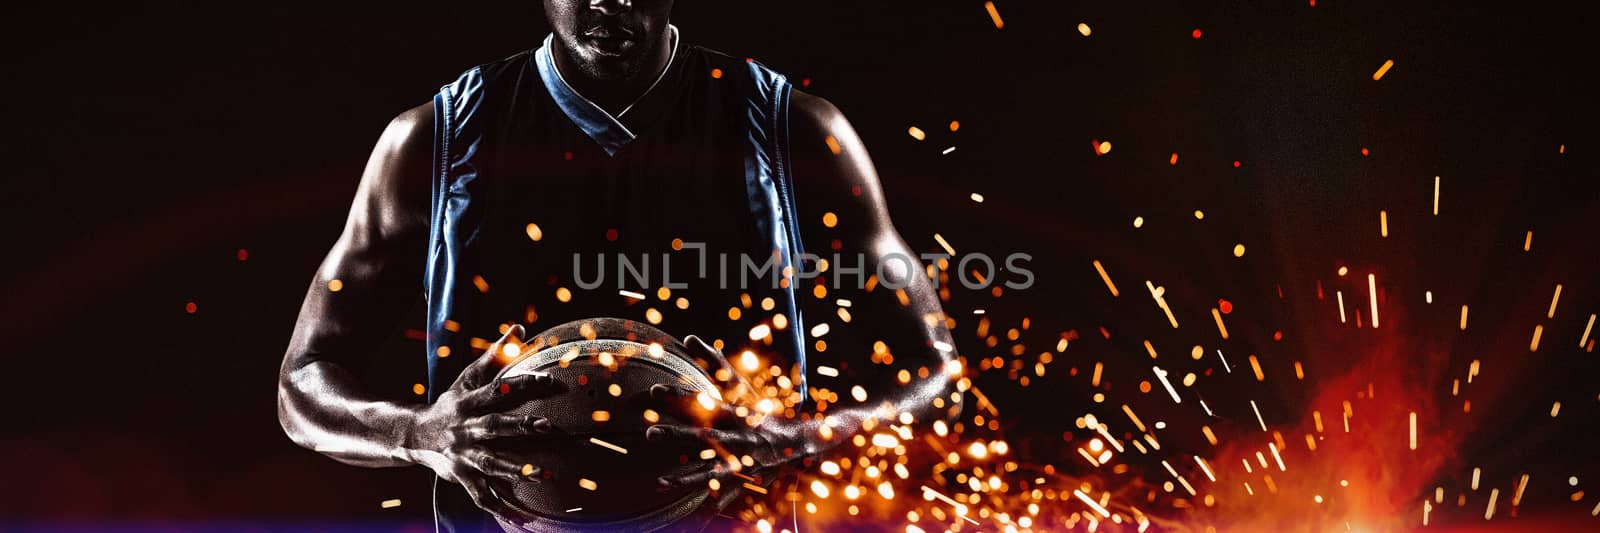 Sports player holding ball while standing against black background